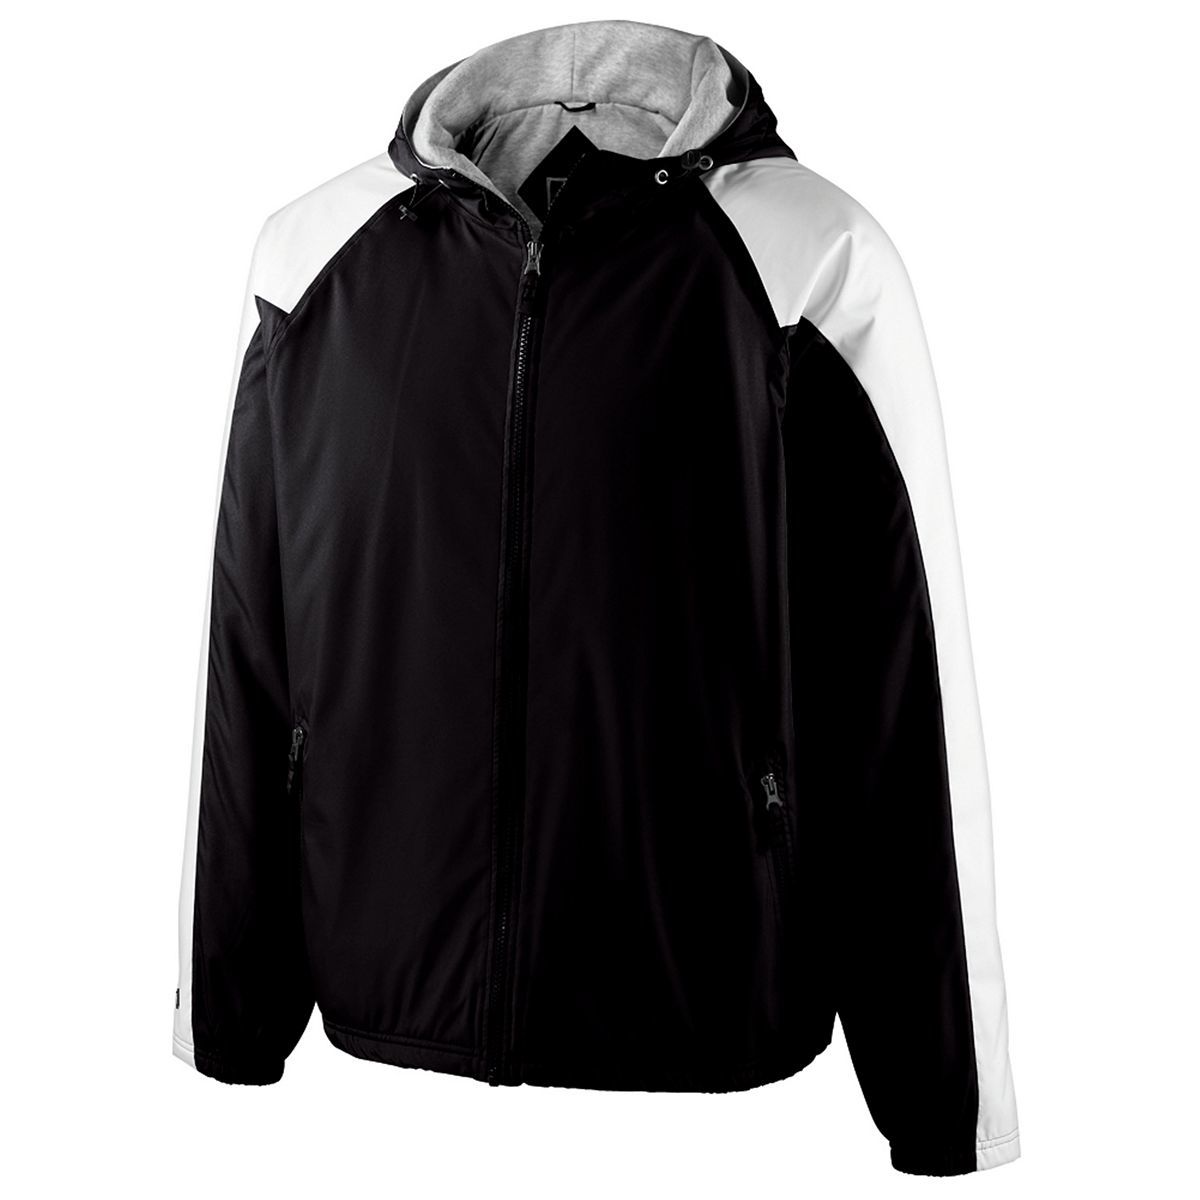 Holloway Youth Homefield Jacket in Black/White  -Part of the Youth, Youth-Jacket, Holloway, Outerwear product lines at KanaleyCreations.com